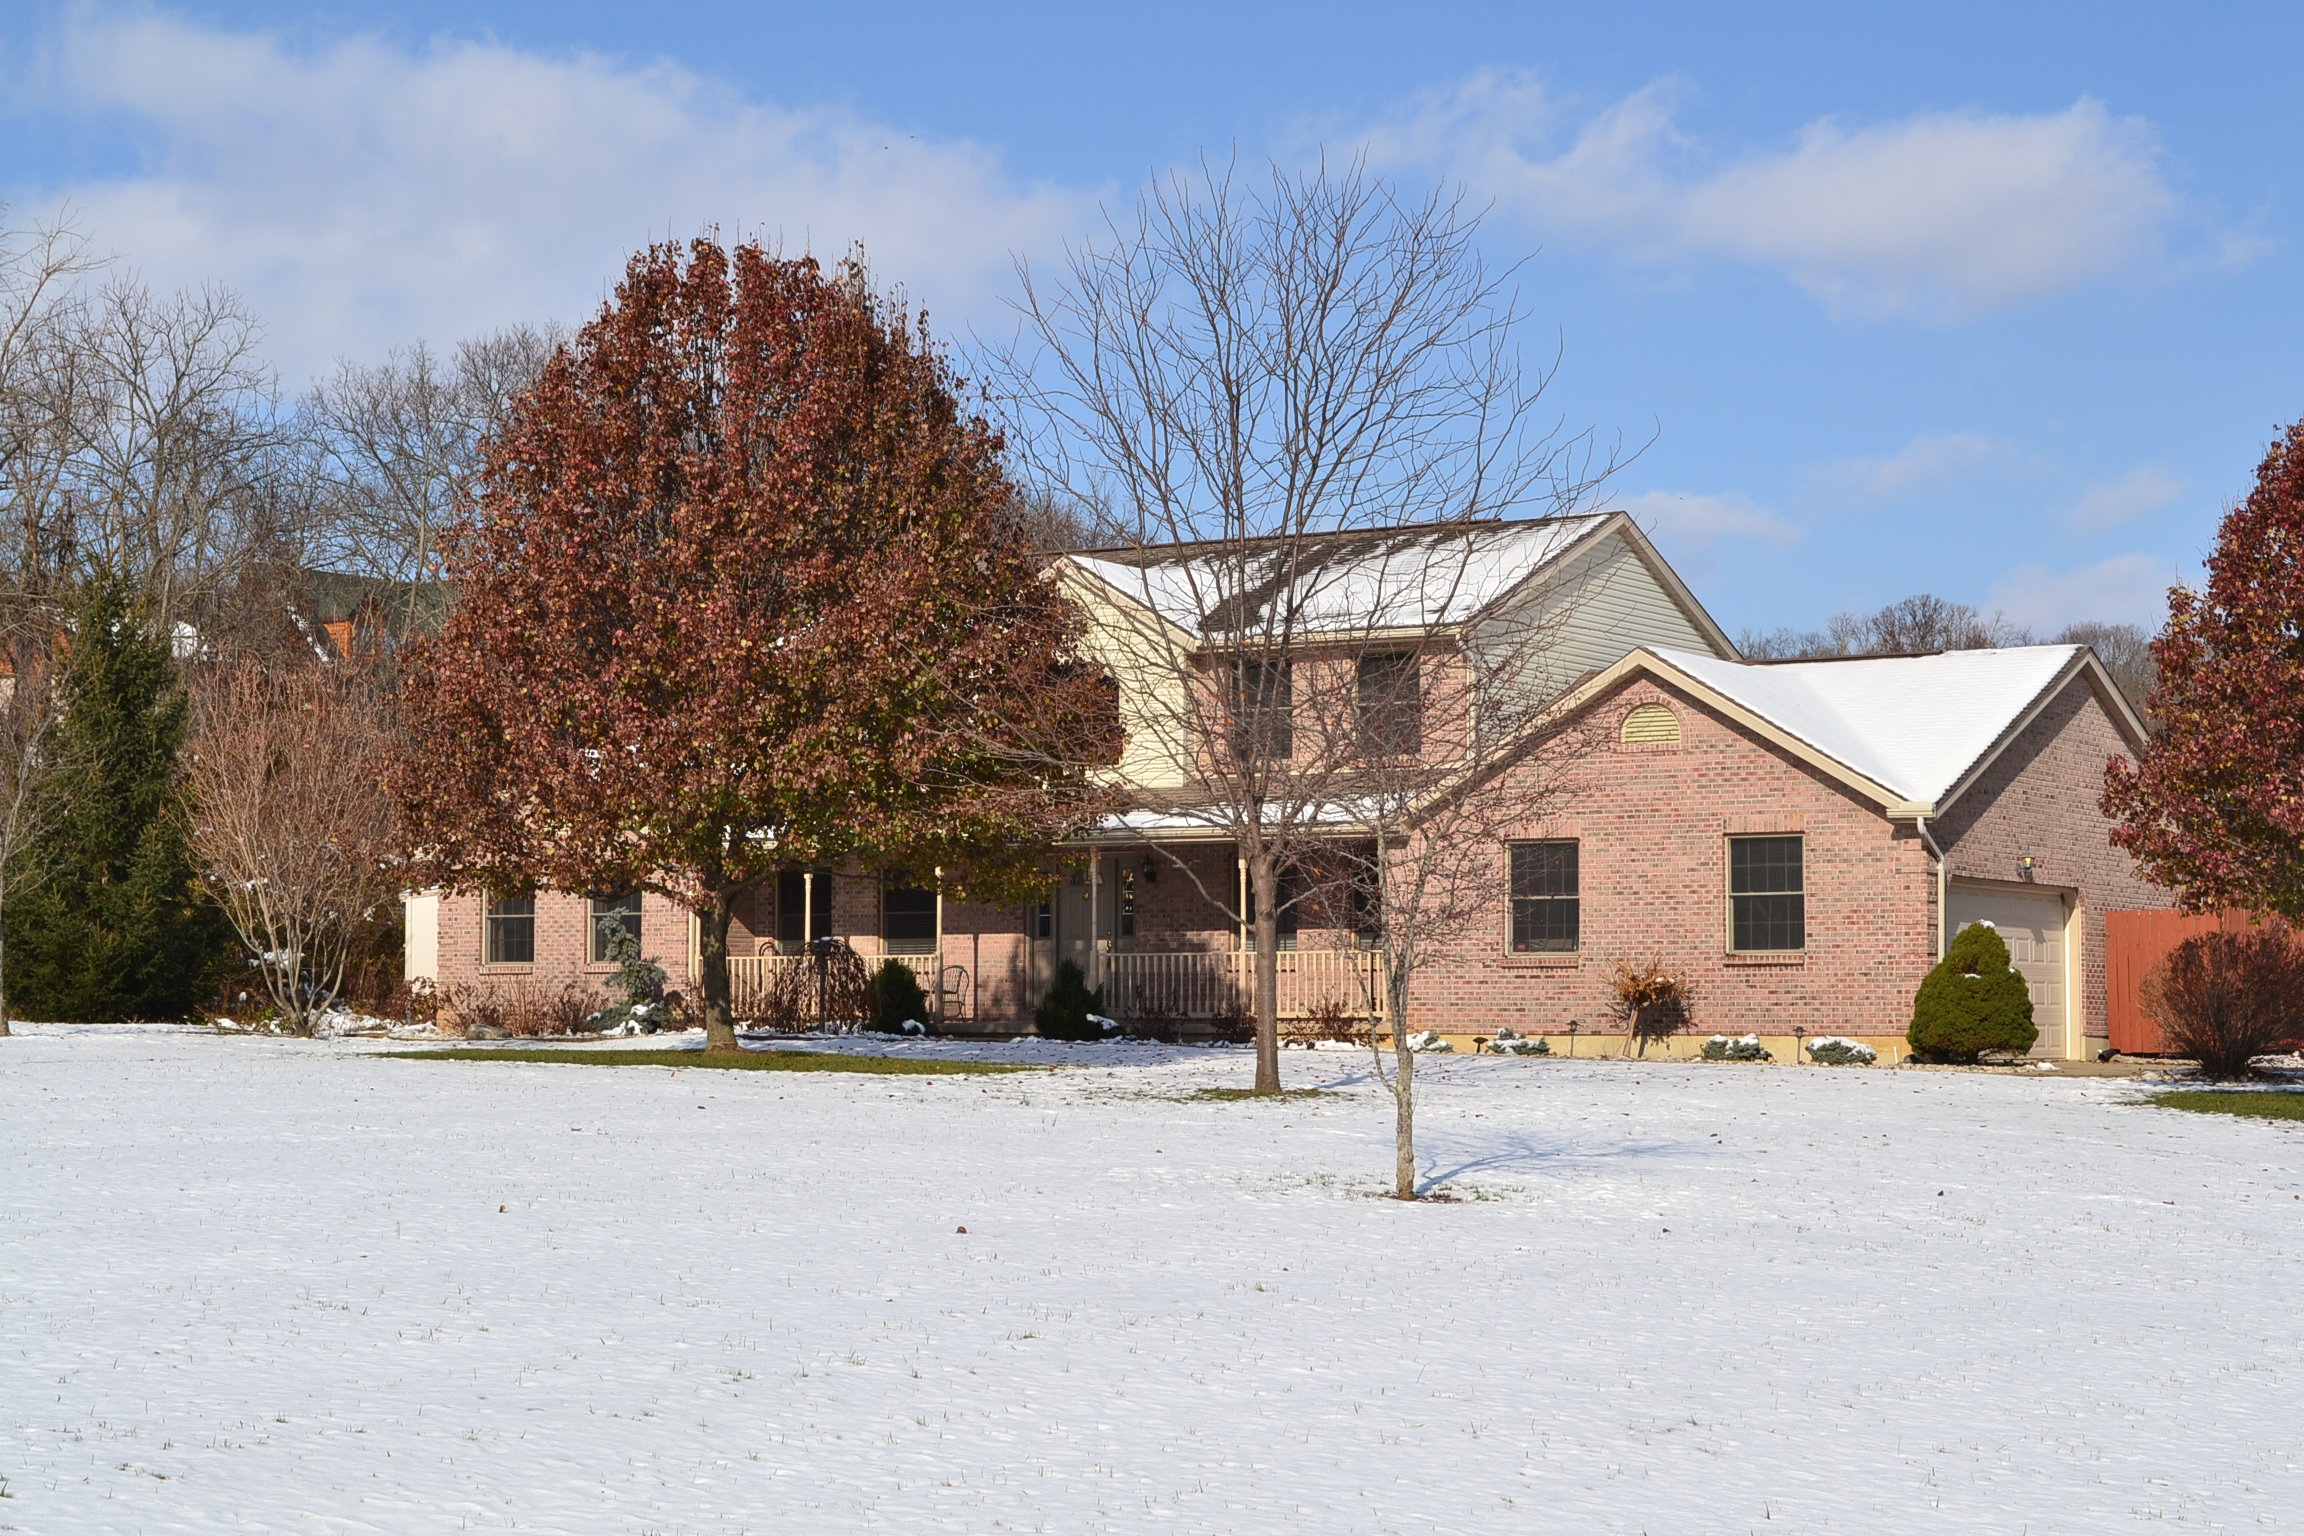 Home for Sale on 5 acres in Madison Township Ohio